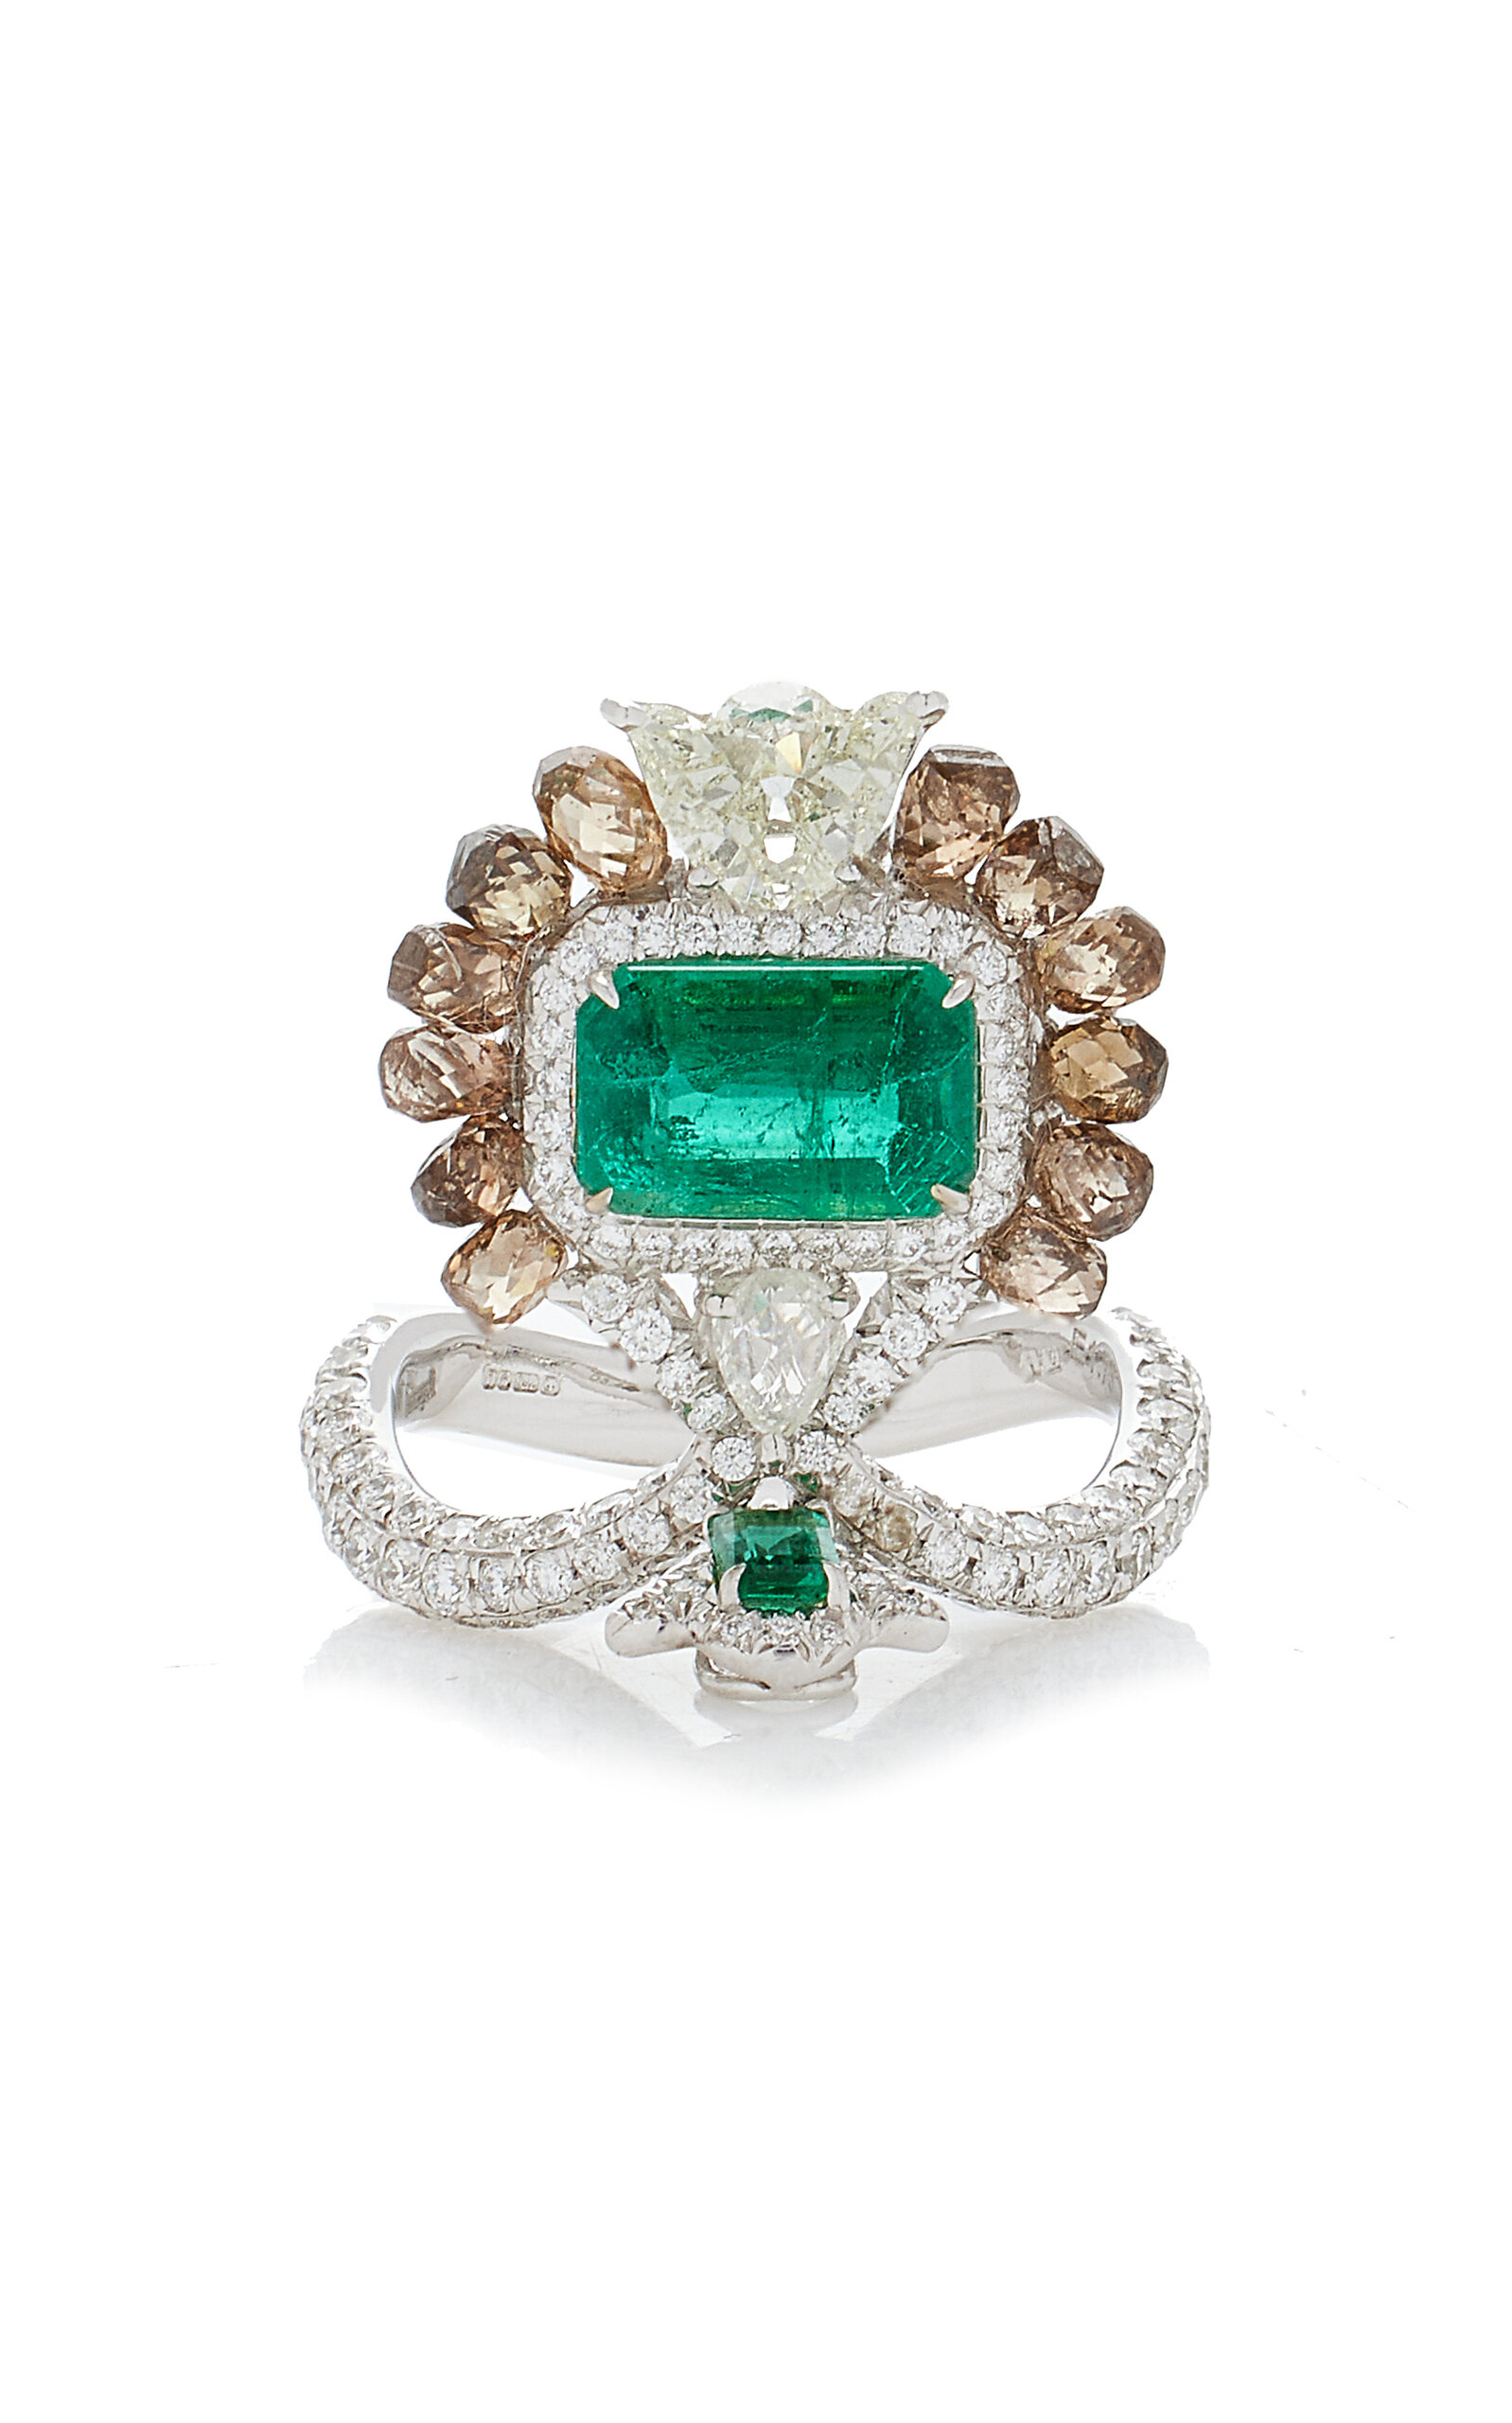 One of a Kind 18K White Gold Diamond & Emerald Ring